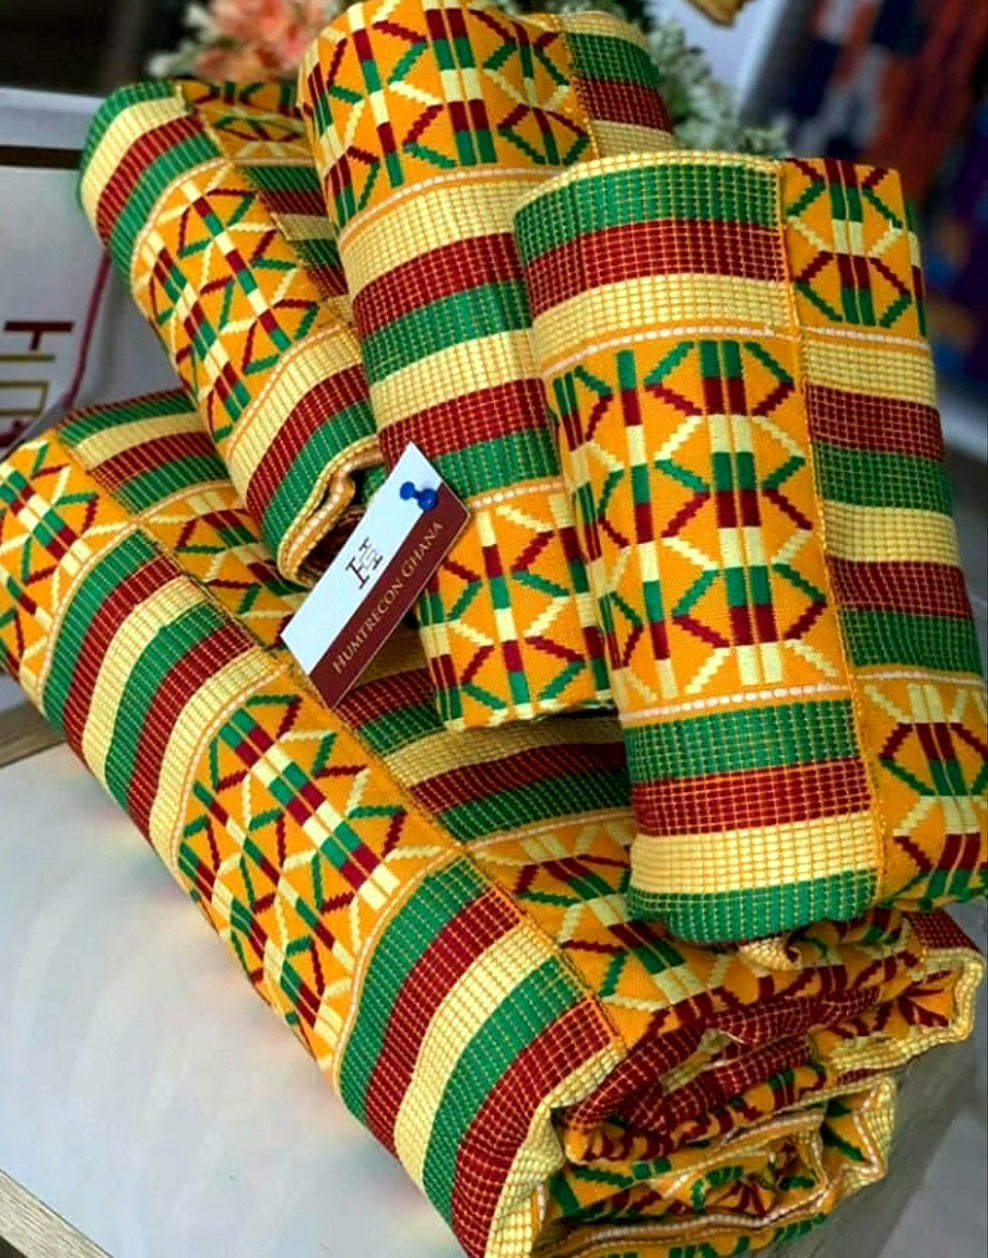 MG Authentic Hand Weaved Kente Cloth A2213